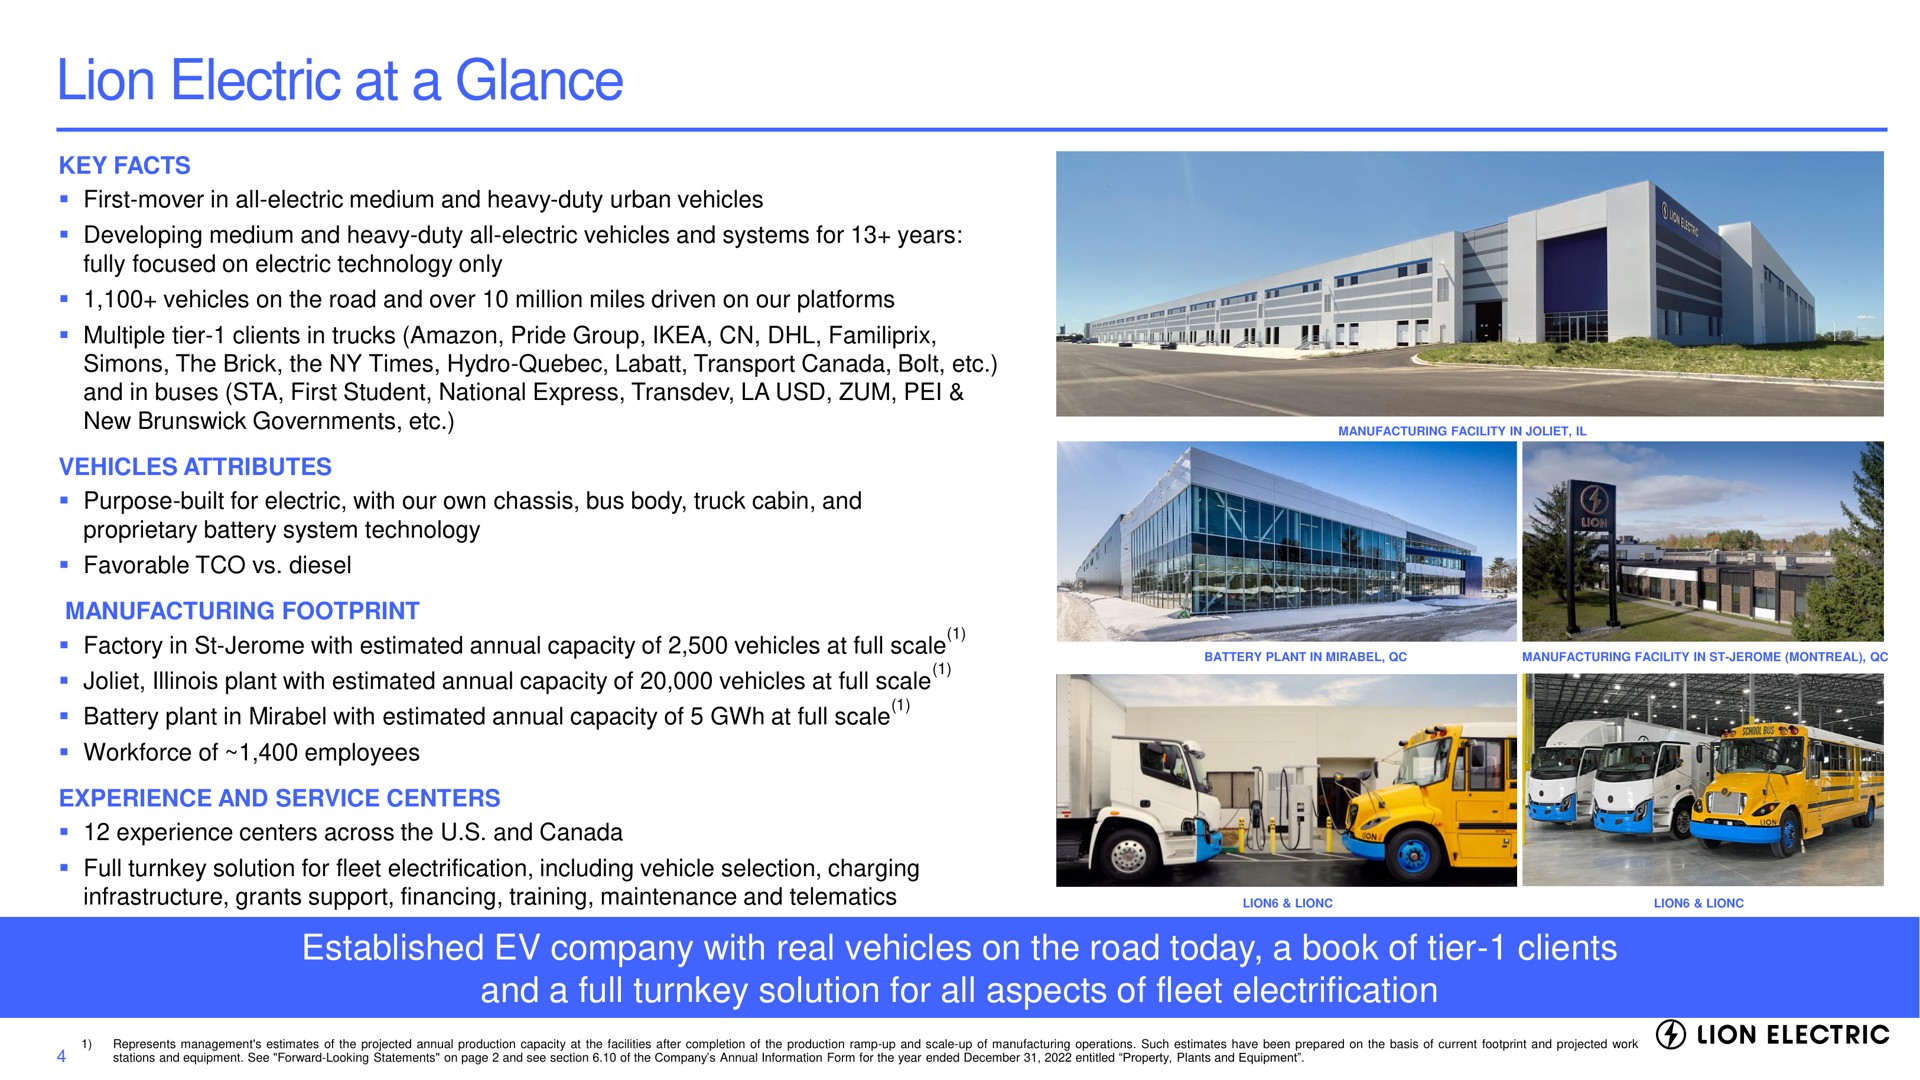 lion electric at a glance established company with real vehicles on the road today a book of tier clients and a full turnkey solution for all aspects of fleet electrification key facts attributes manufacturing footprint experience service centers | Lion Electric